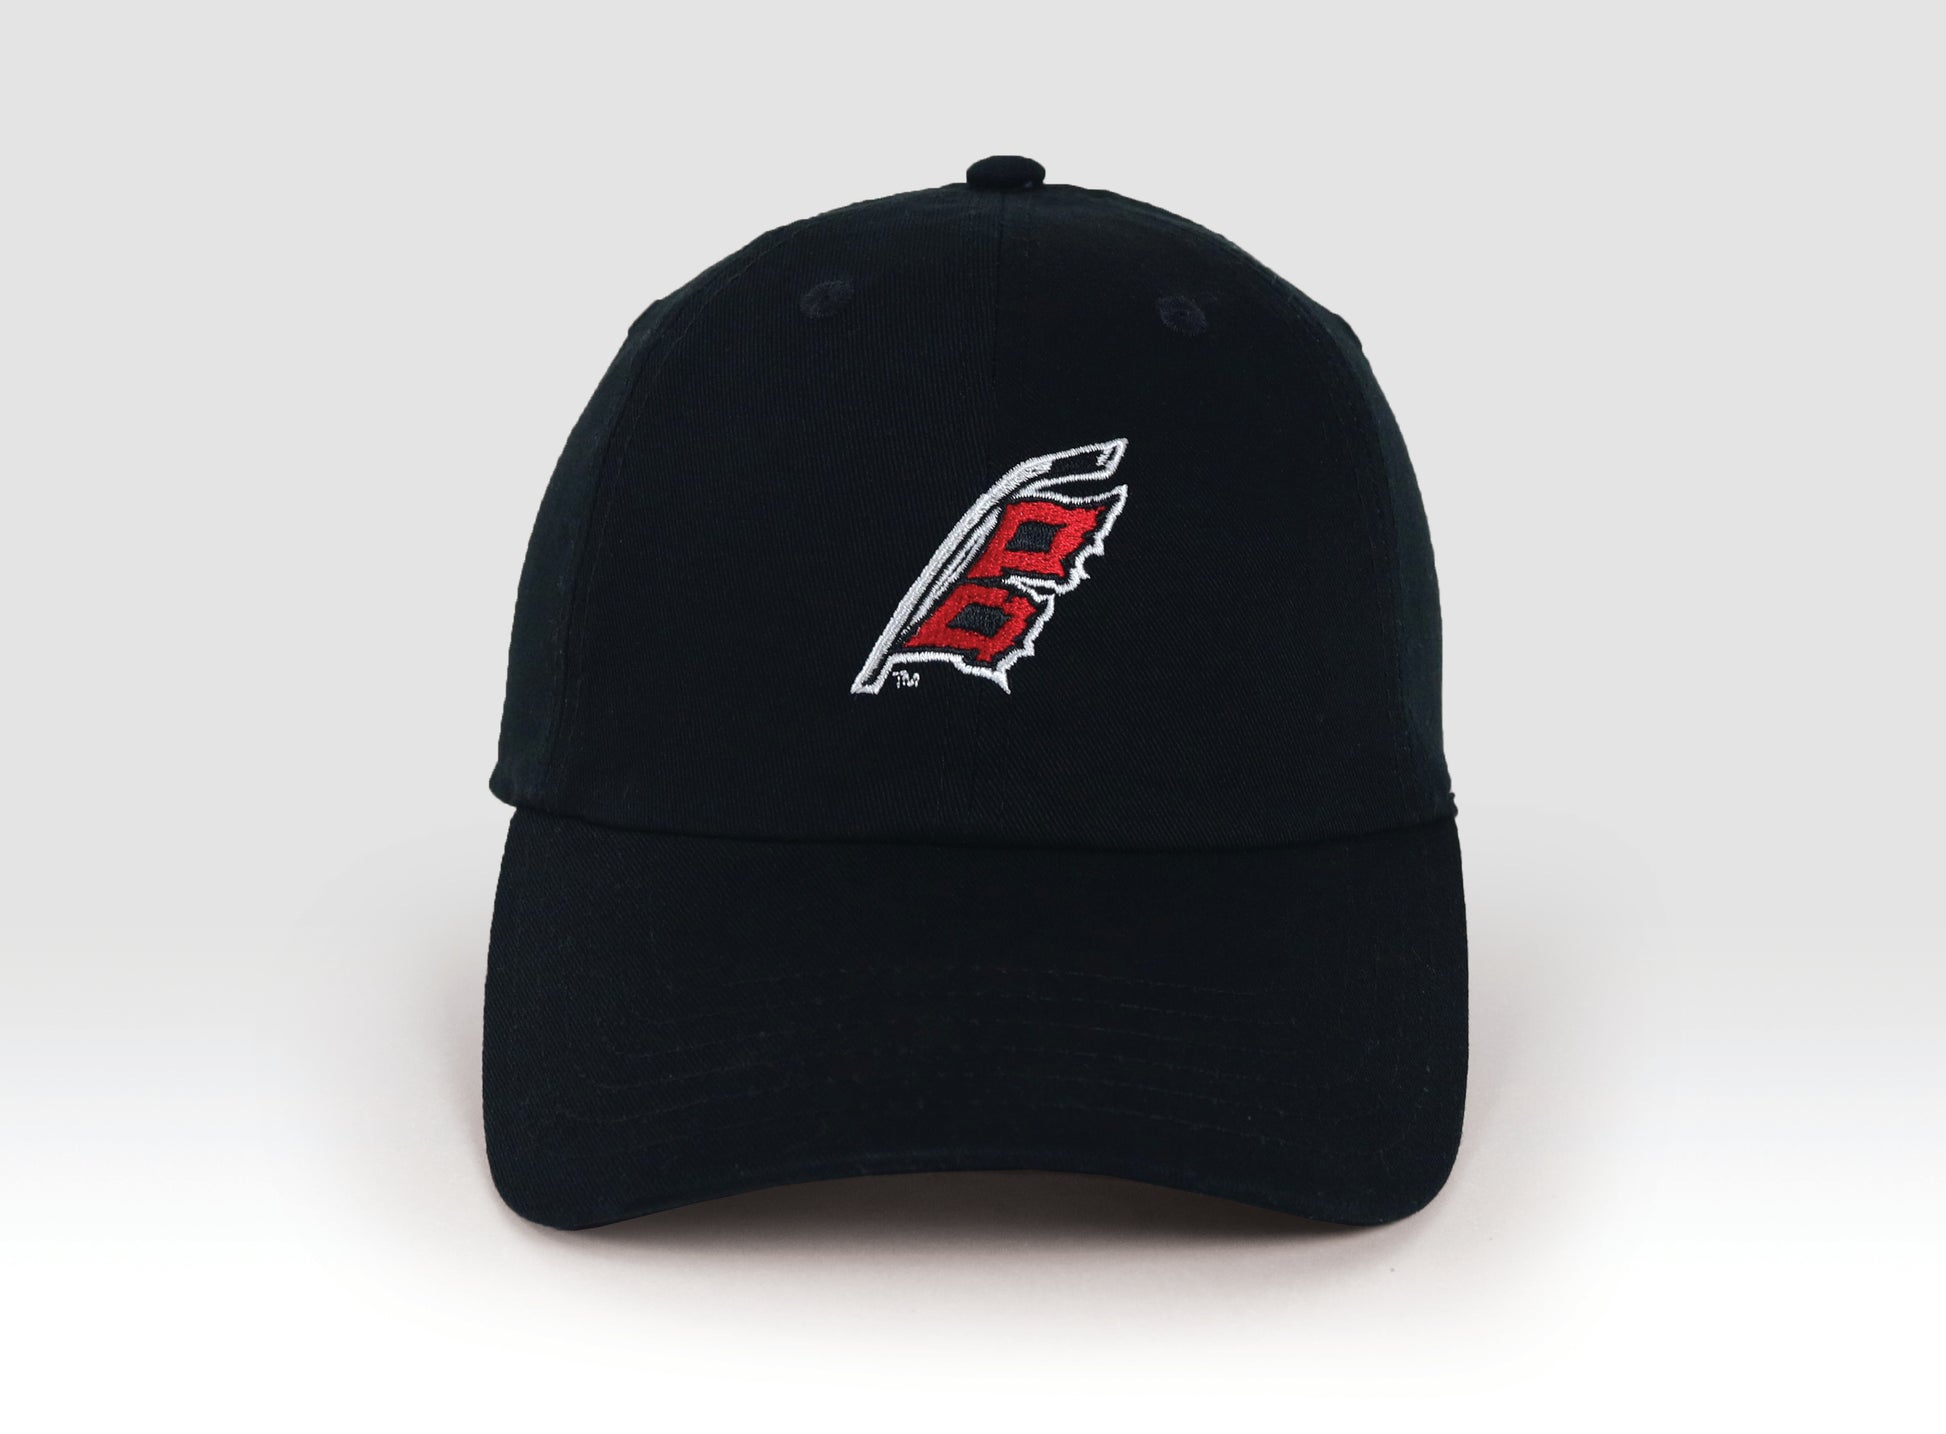 Front View: Black hat with Hurricanes flag logo on front